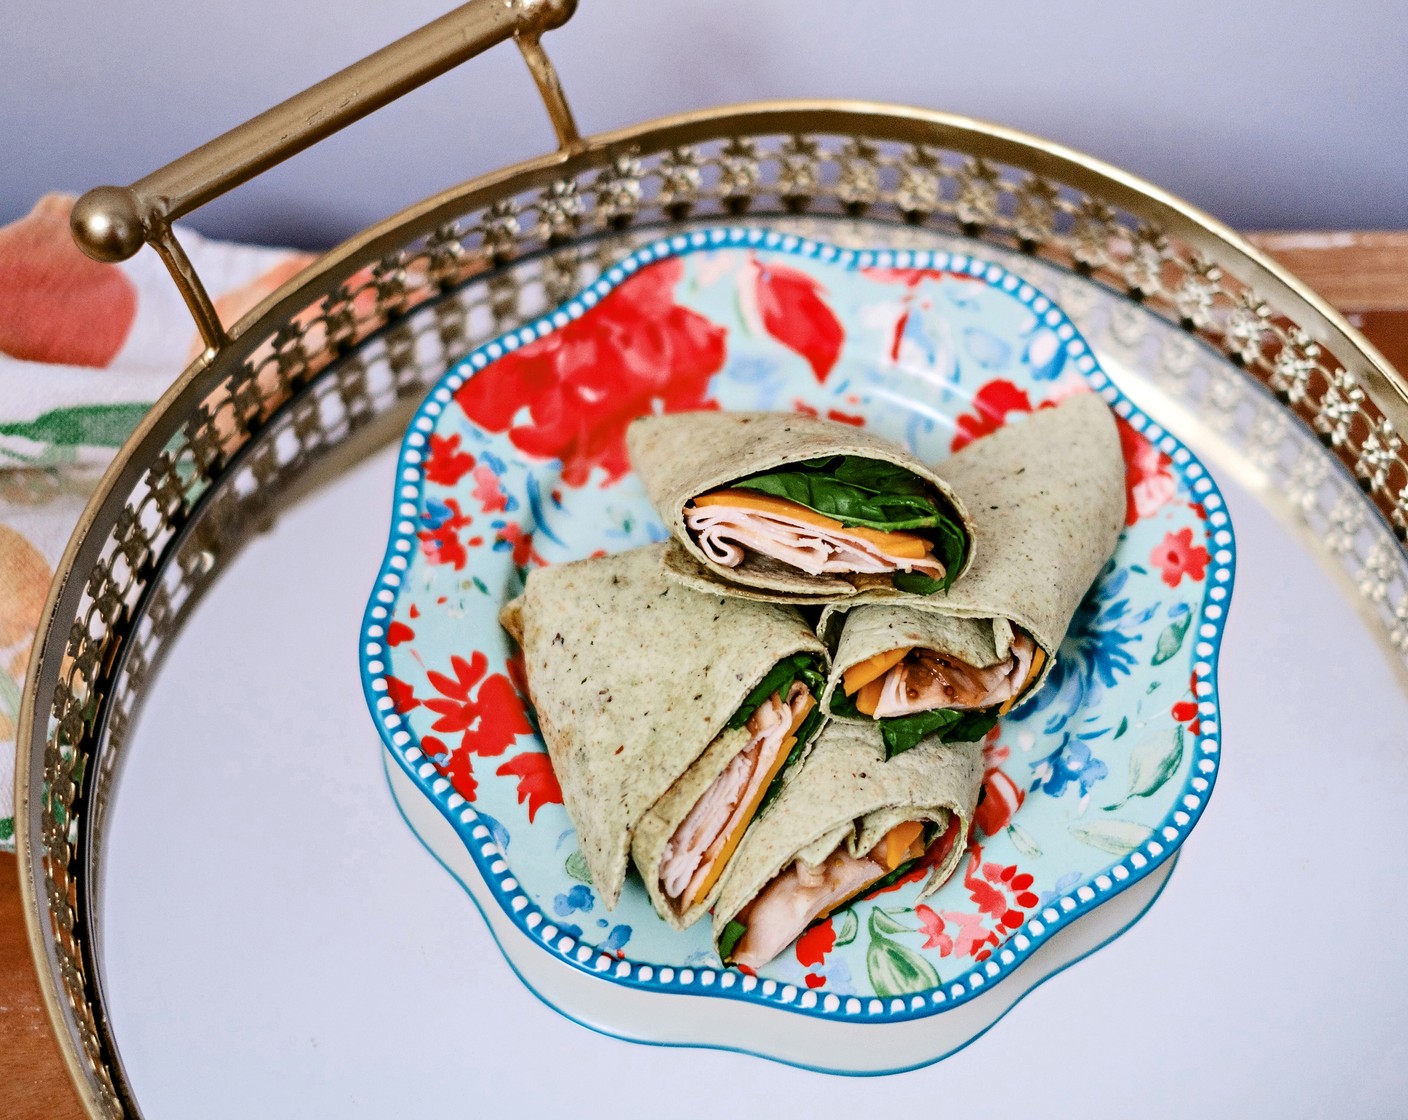 Turkey and Cheese Wraps with Homemade Balsamic